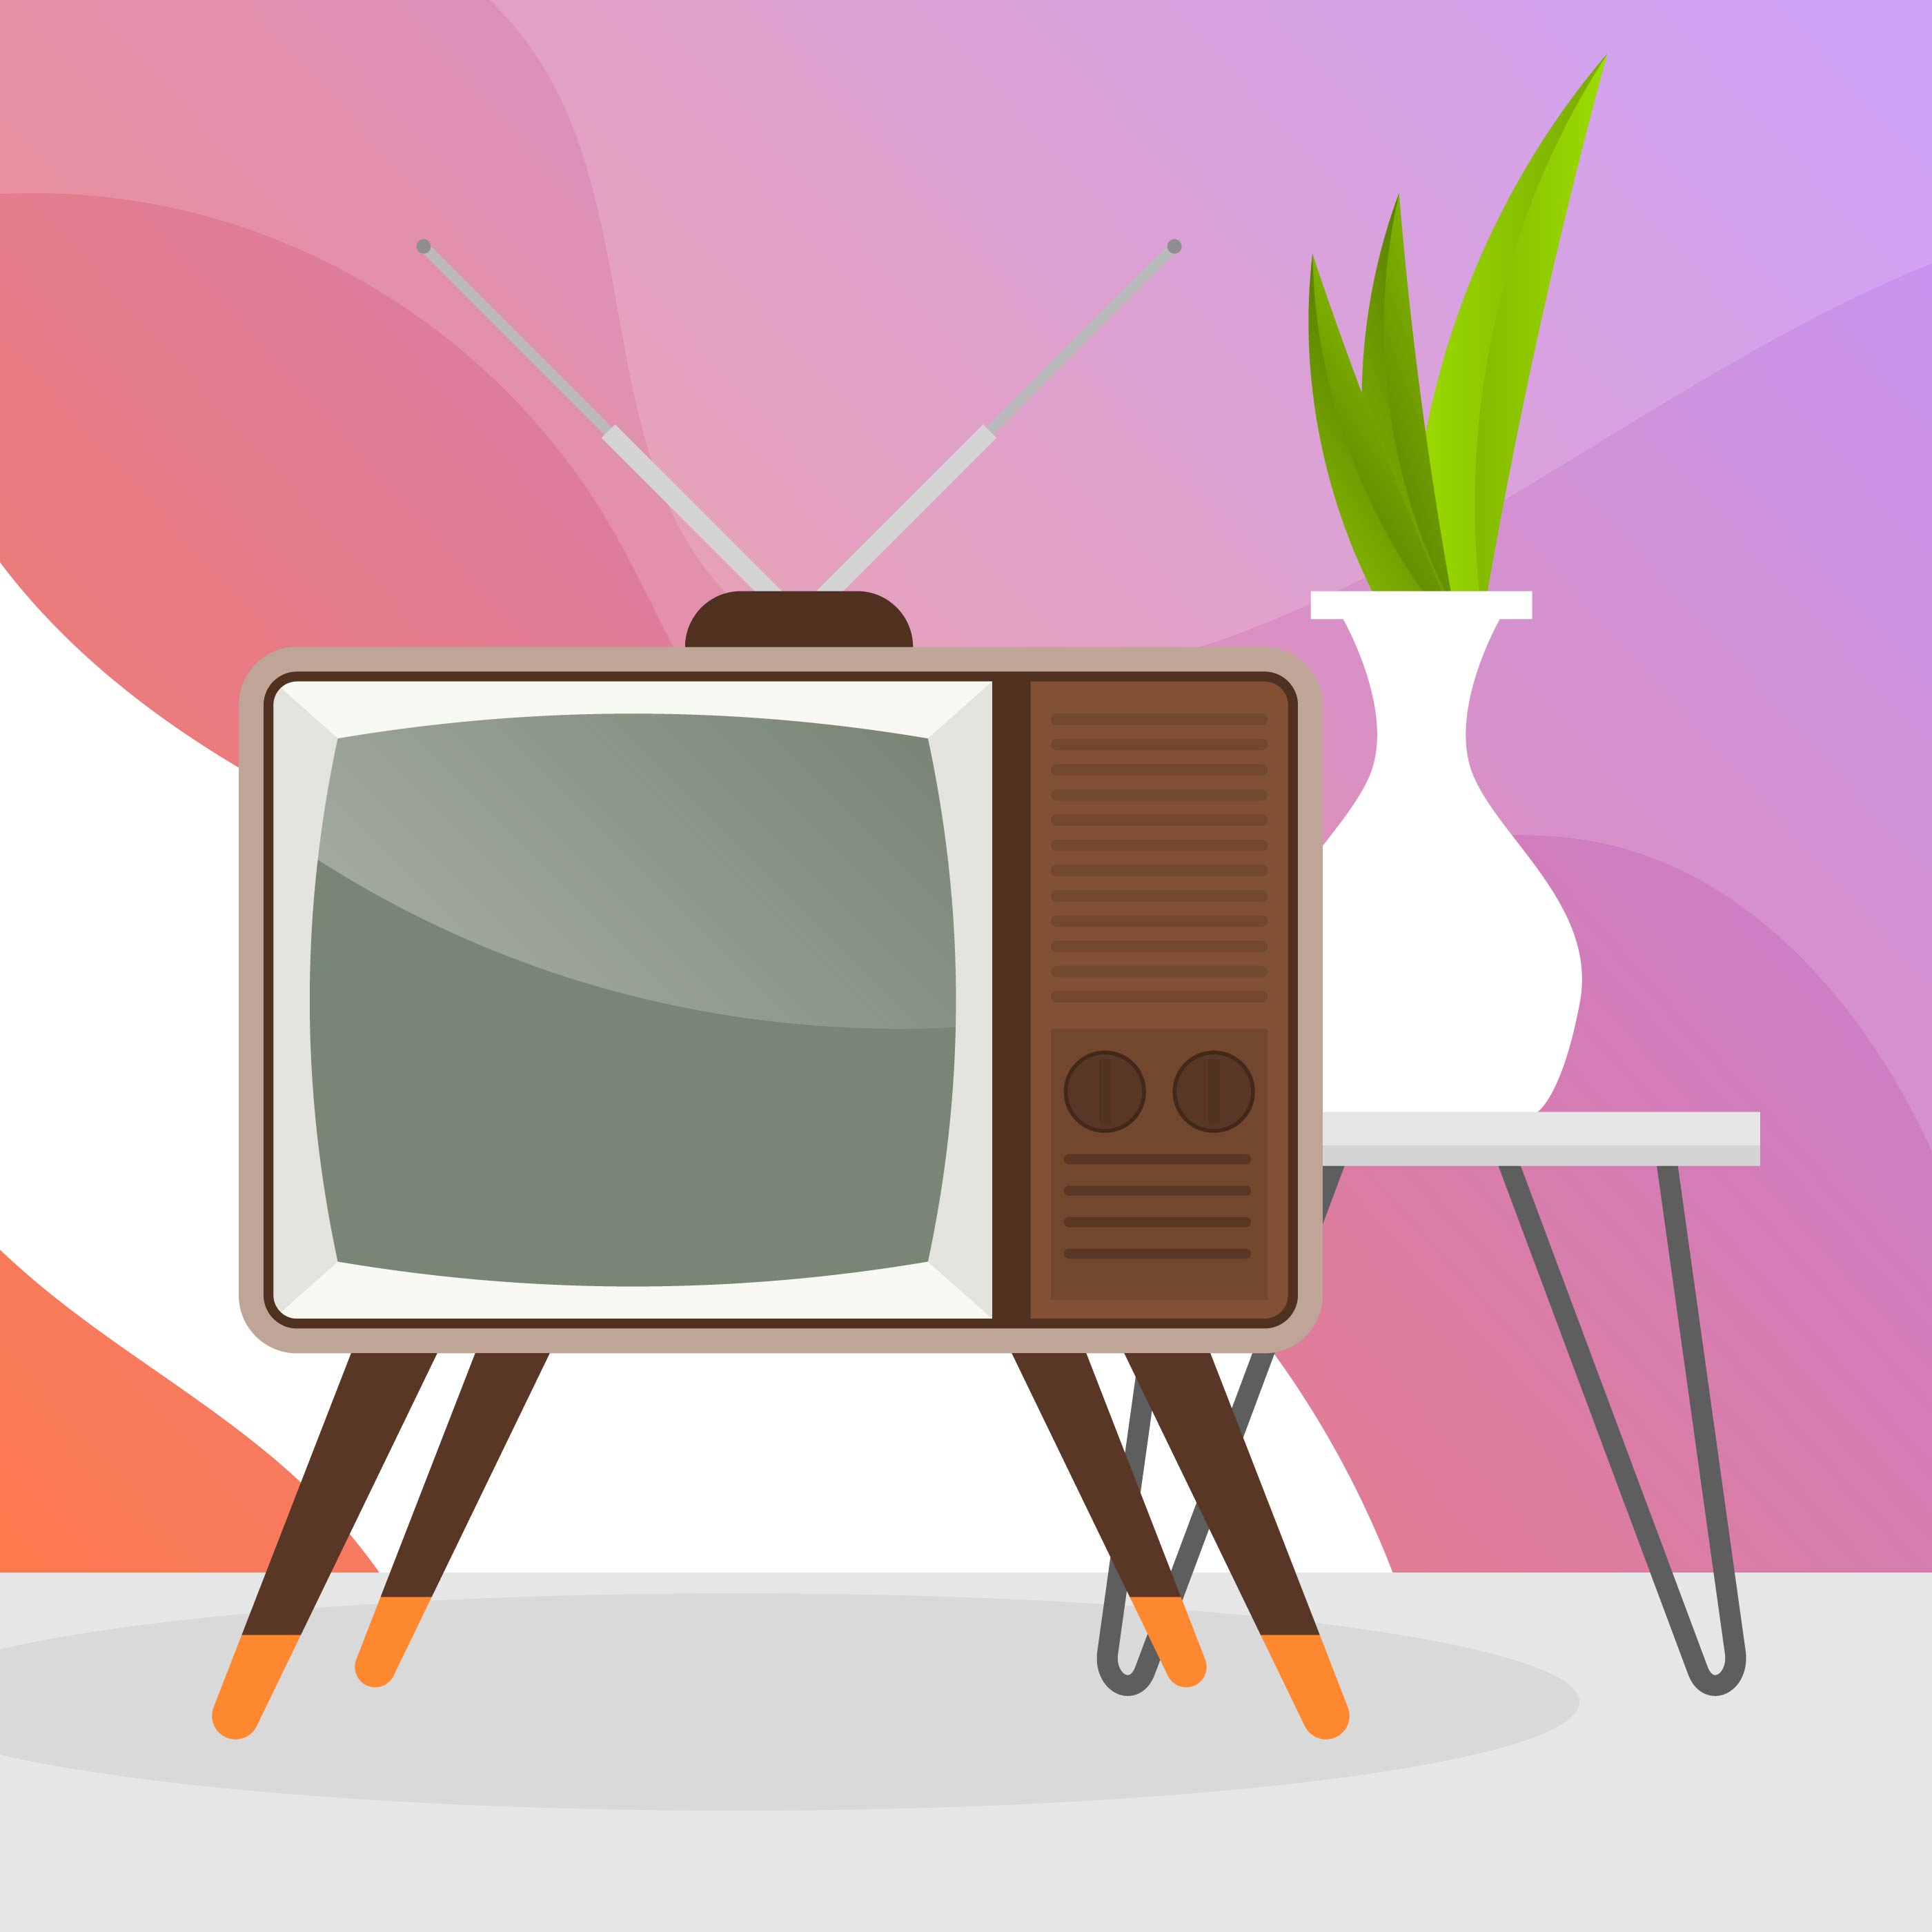 Flat Retro Television With Gradient Background Vector Illustration